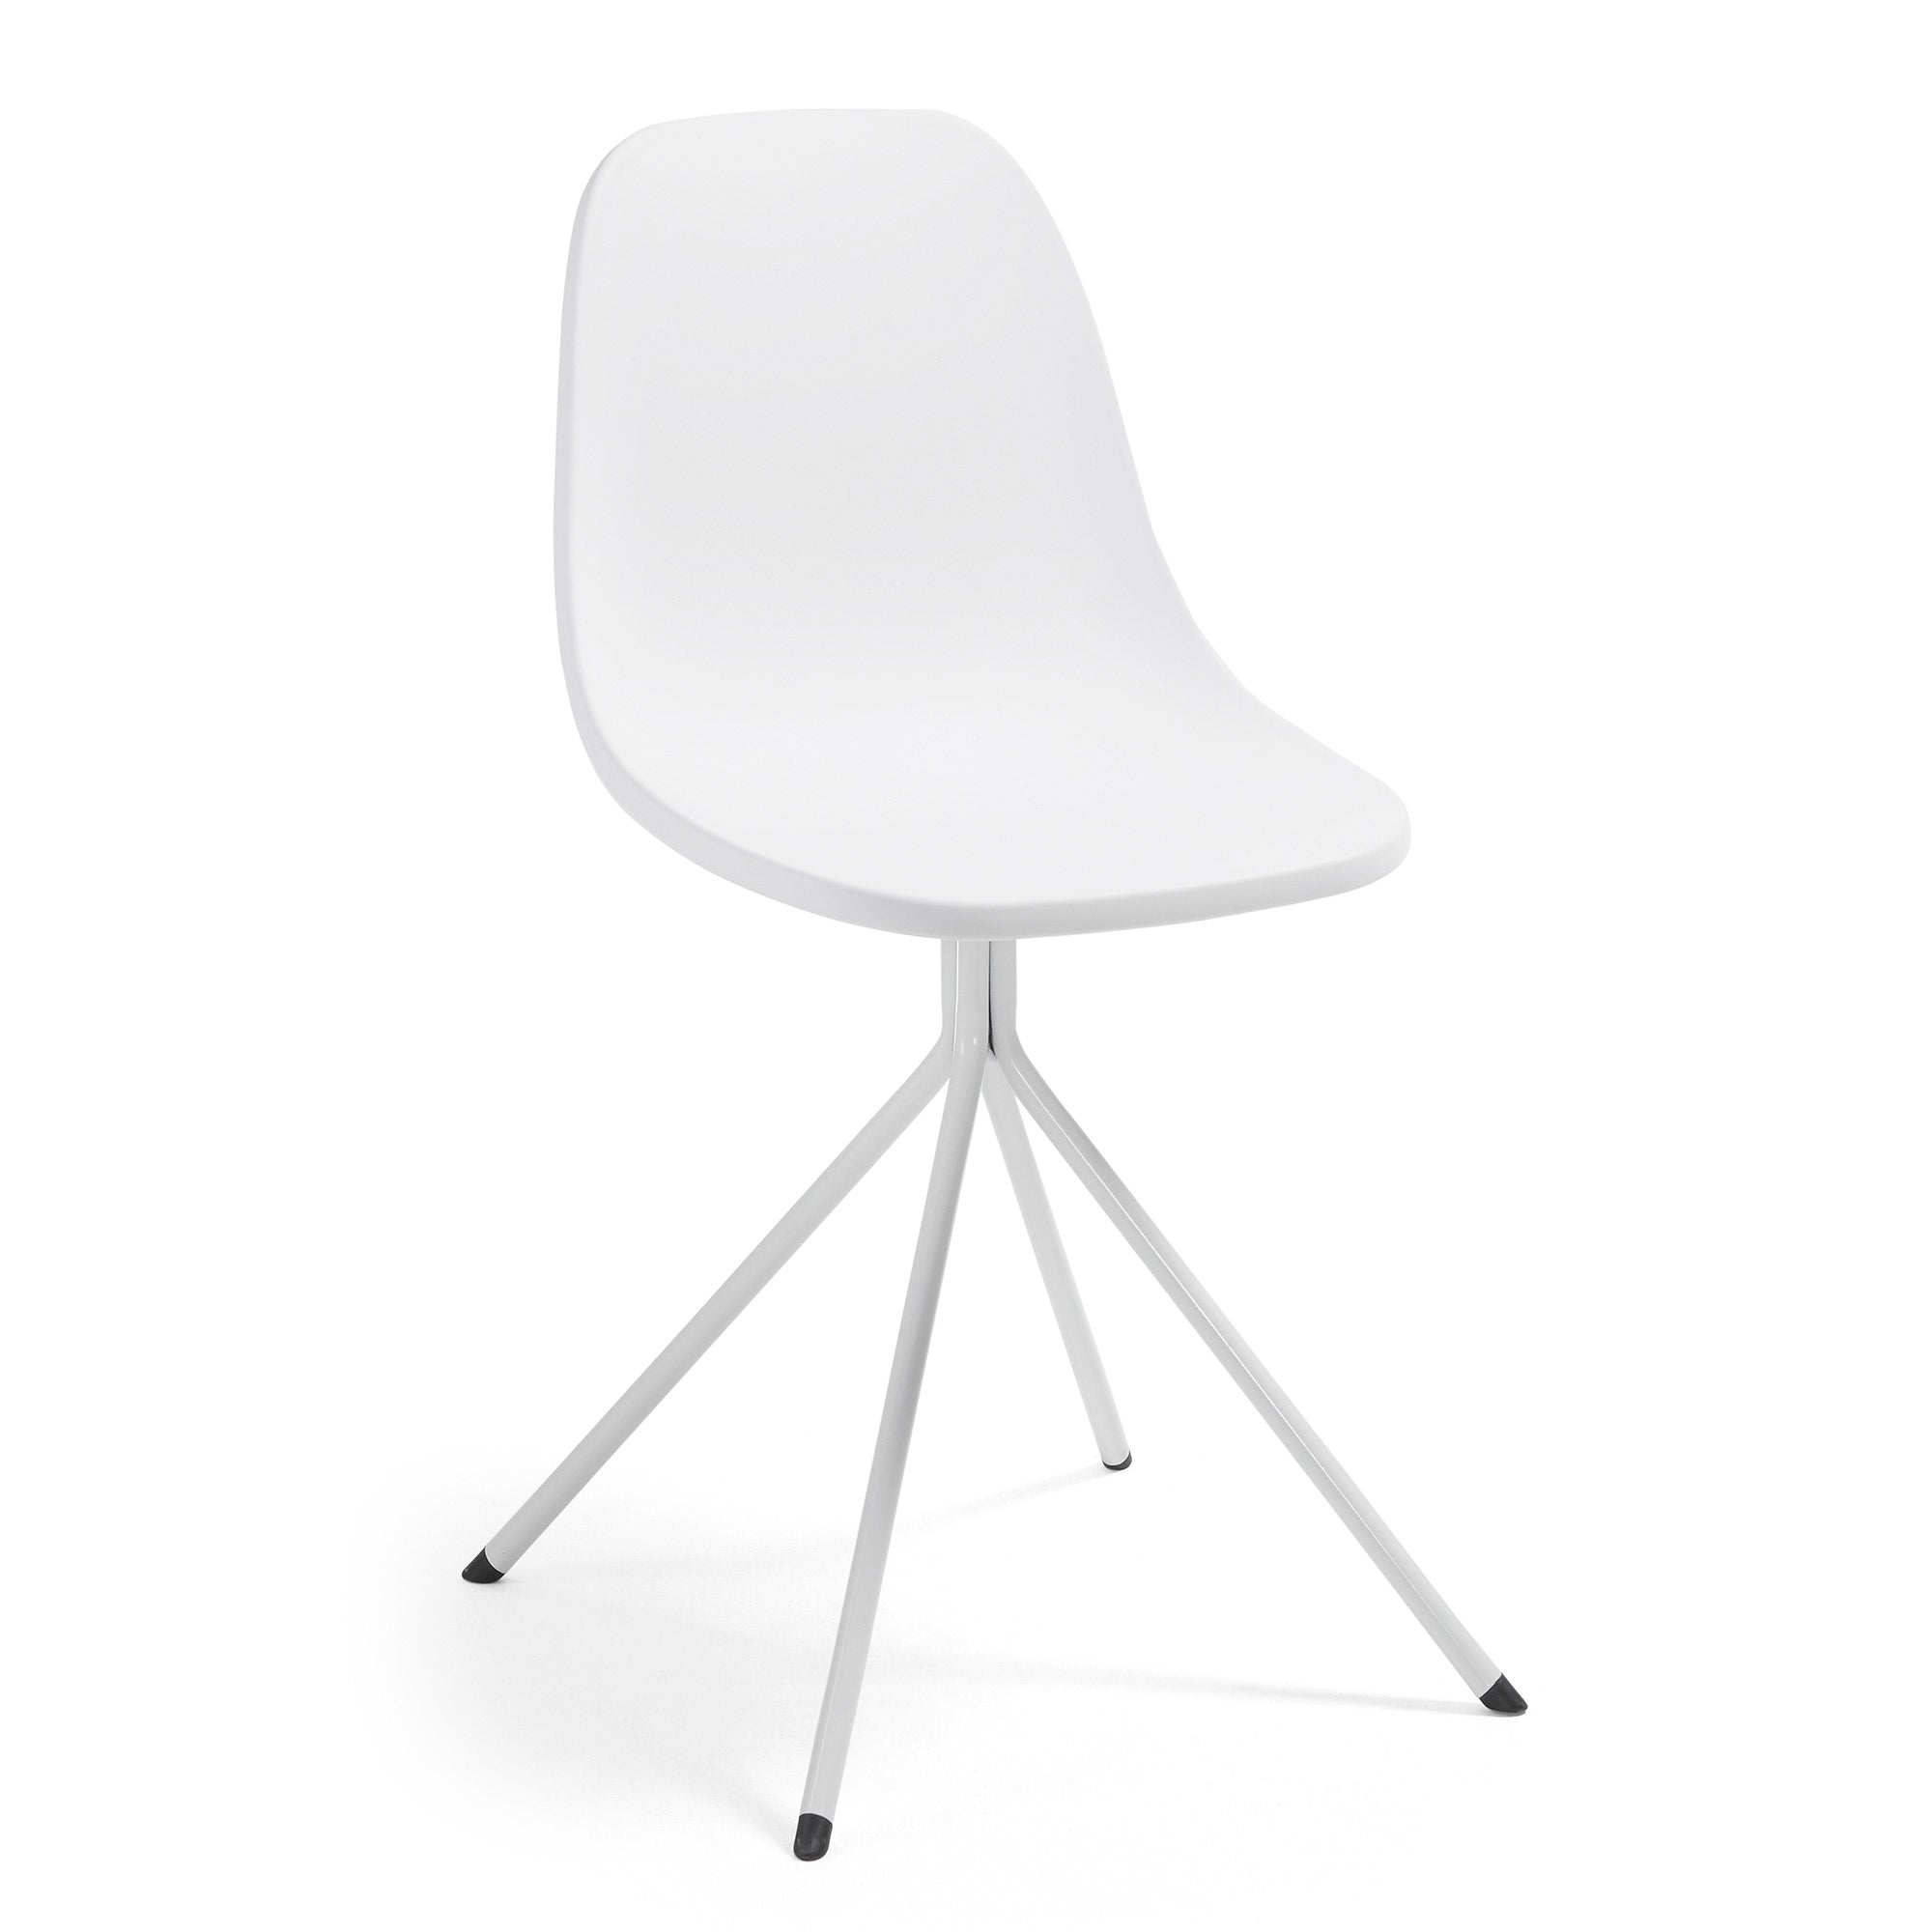 marco chair  white plastic seat and steel legs  4900